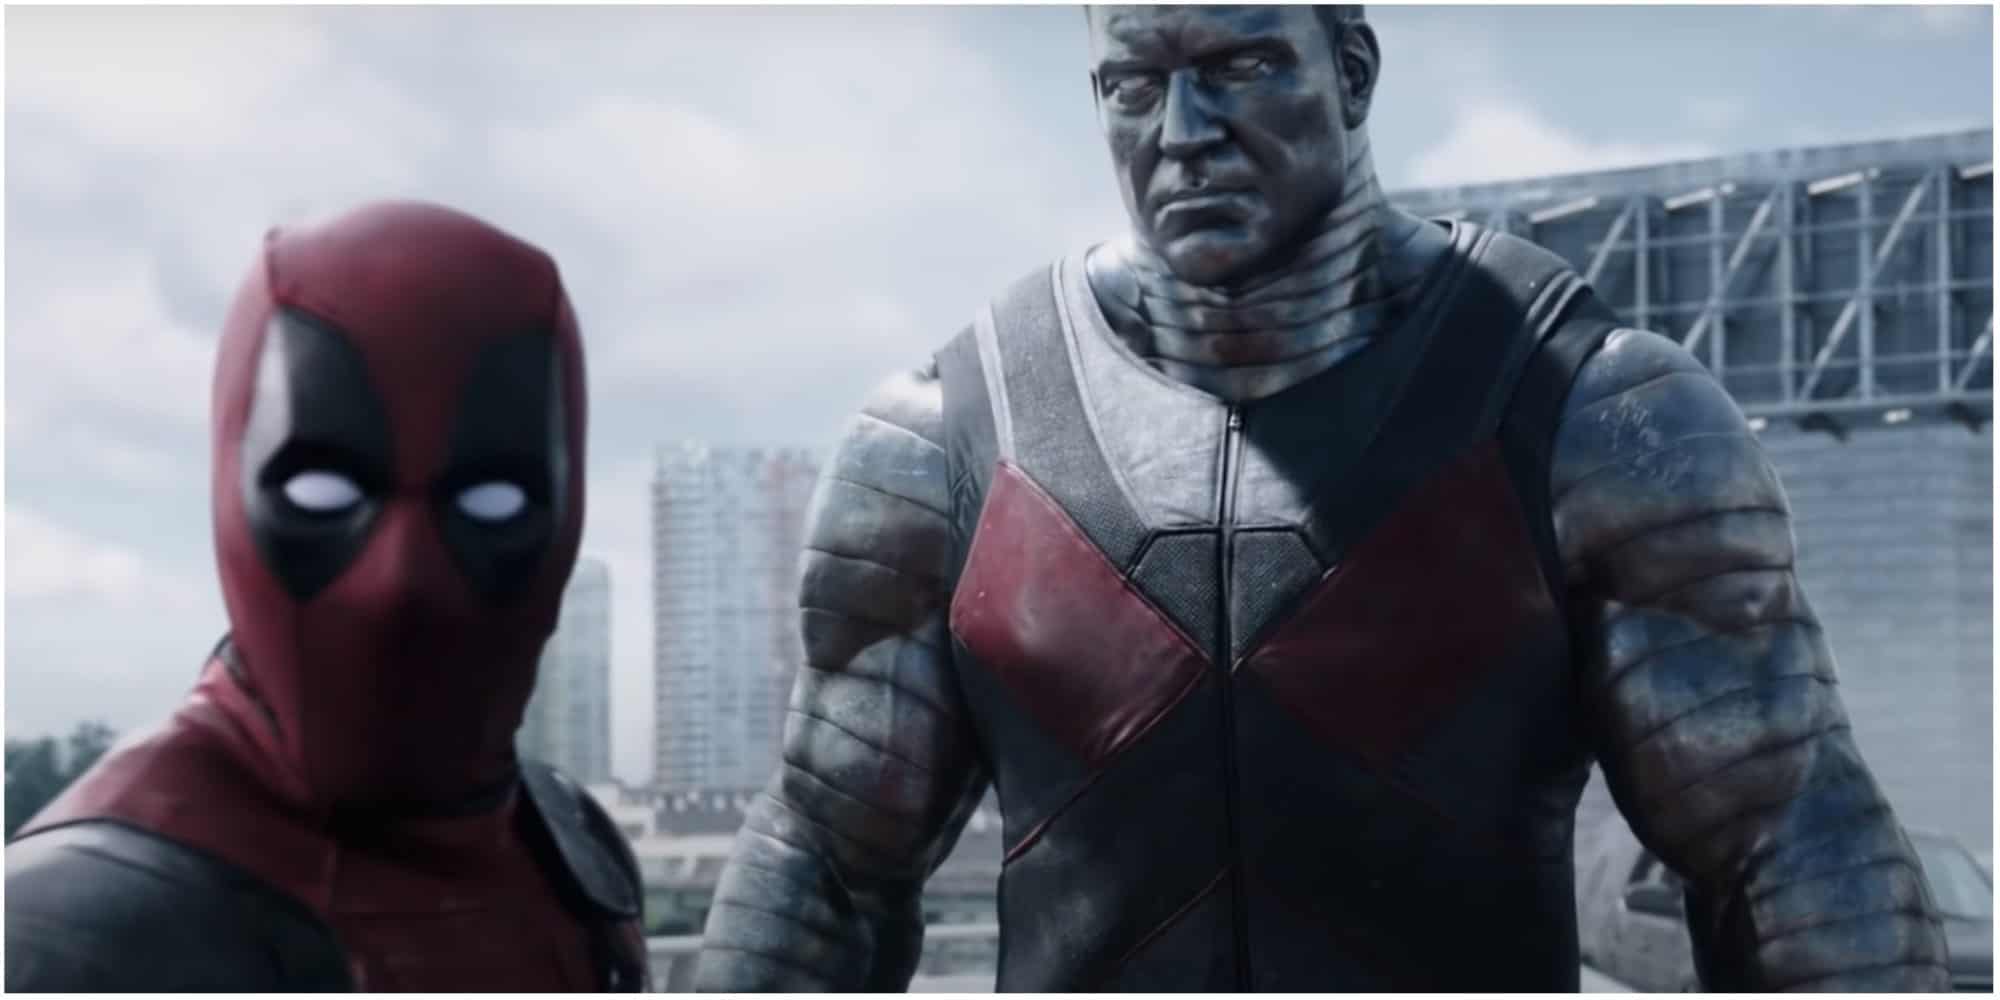 30 Characters Who Can Beat Deadpool - Colossus (Credit: Deadpool Movie)